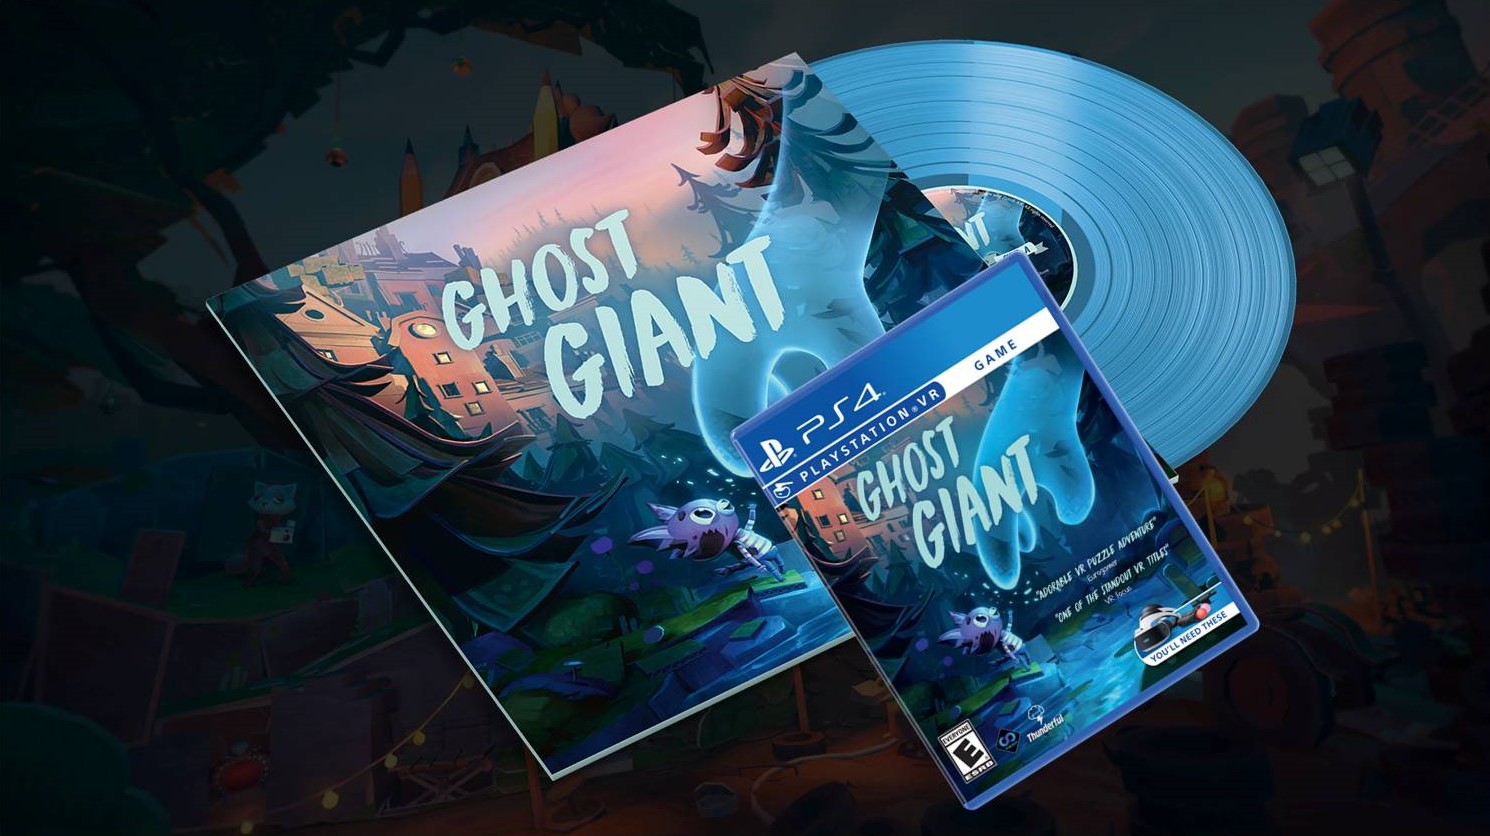 Contest Win A Limited Edition Ghost Giant Soundtrack On Vinyl As Well As The Game Destructoid